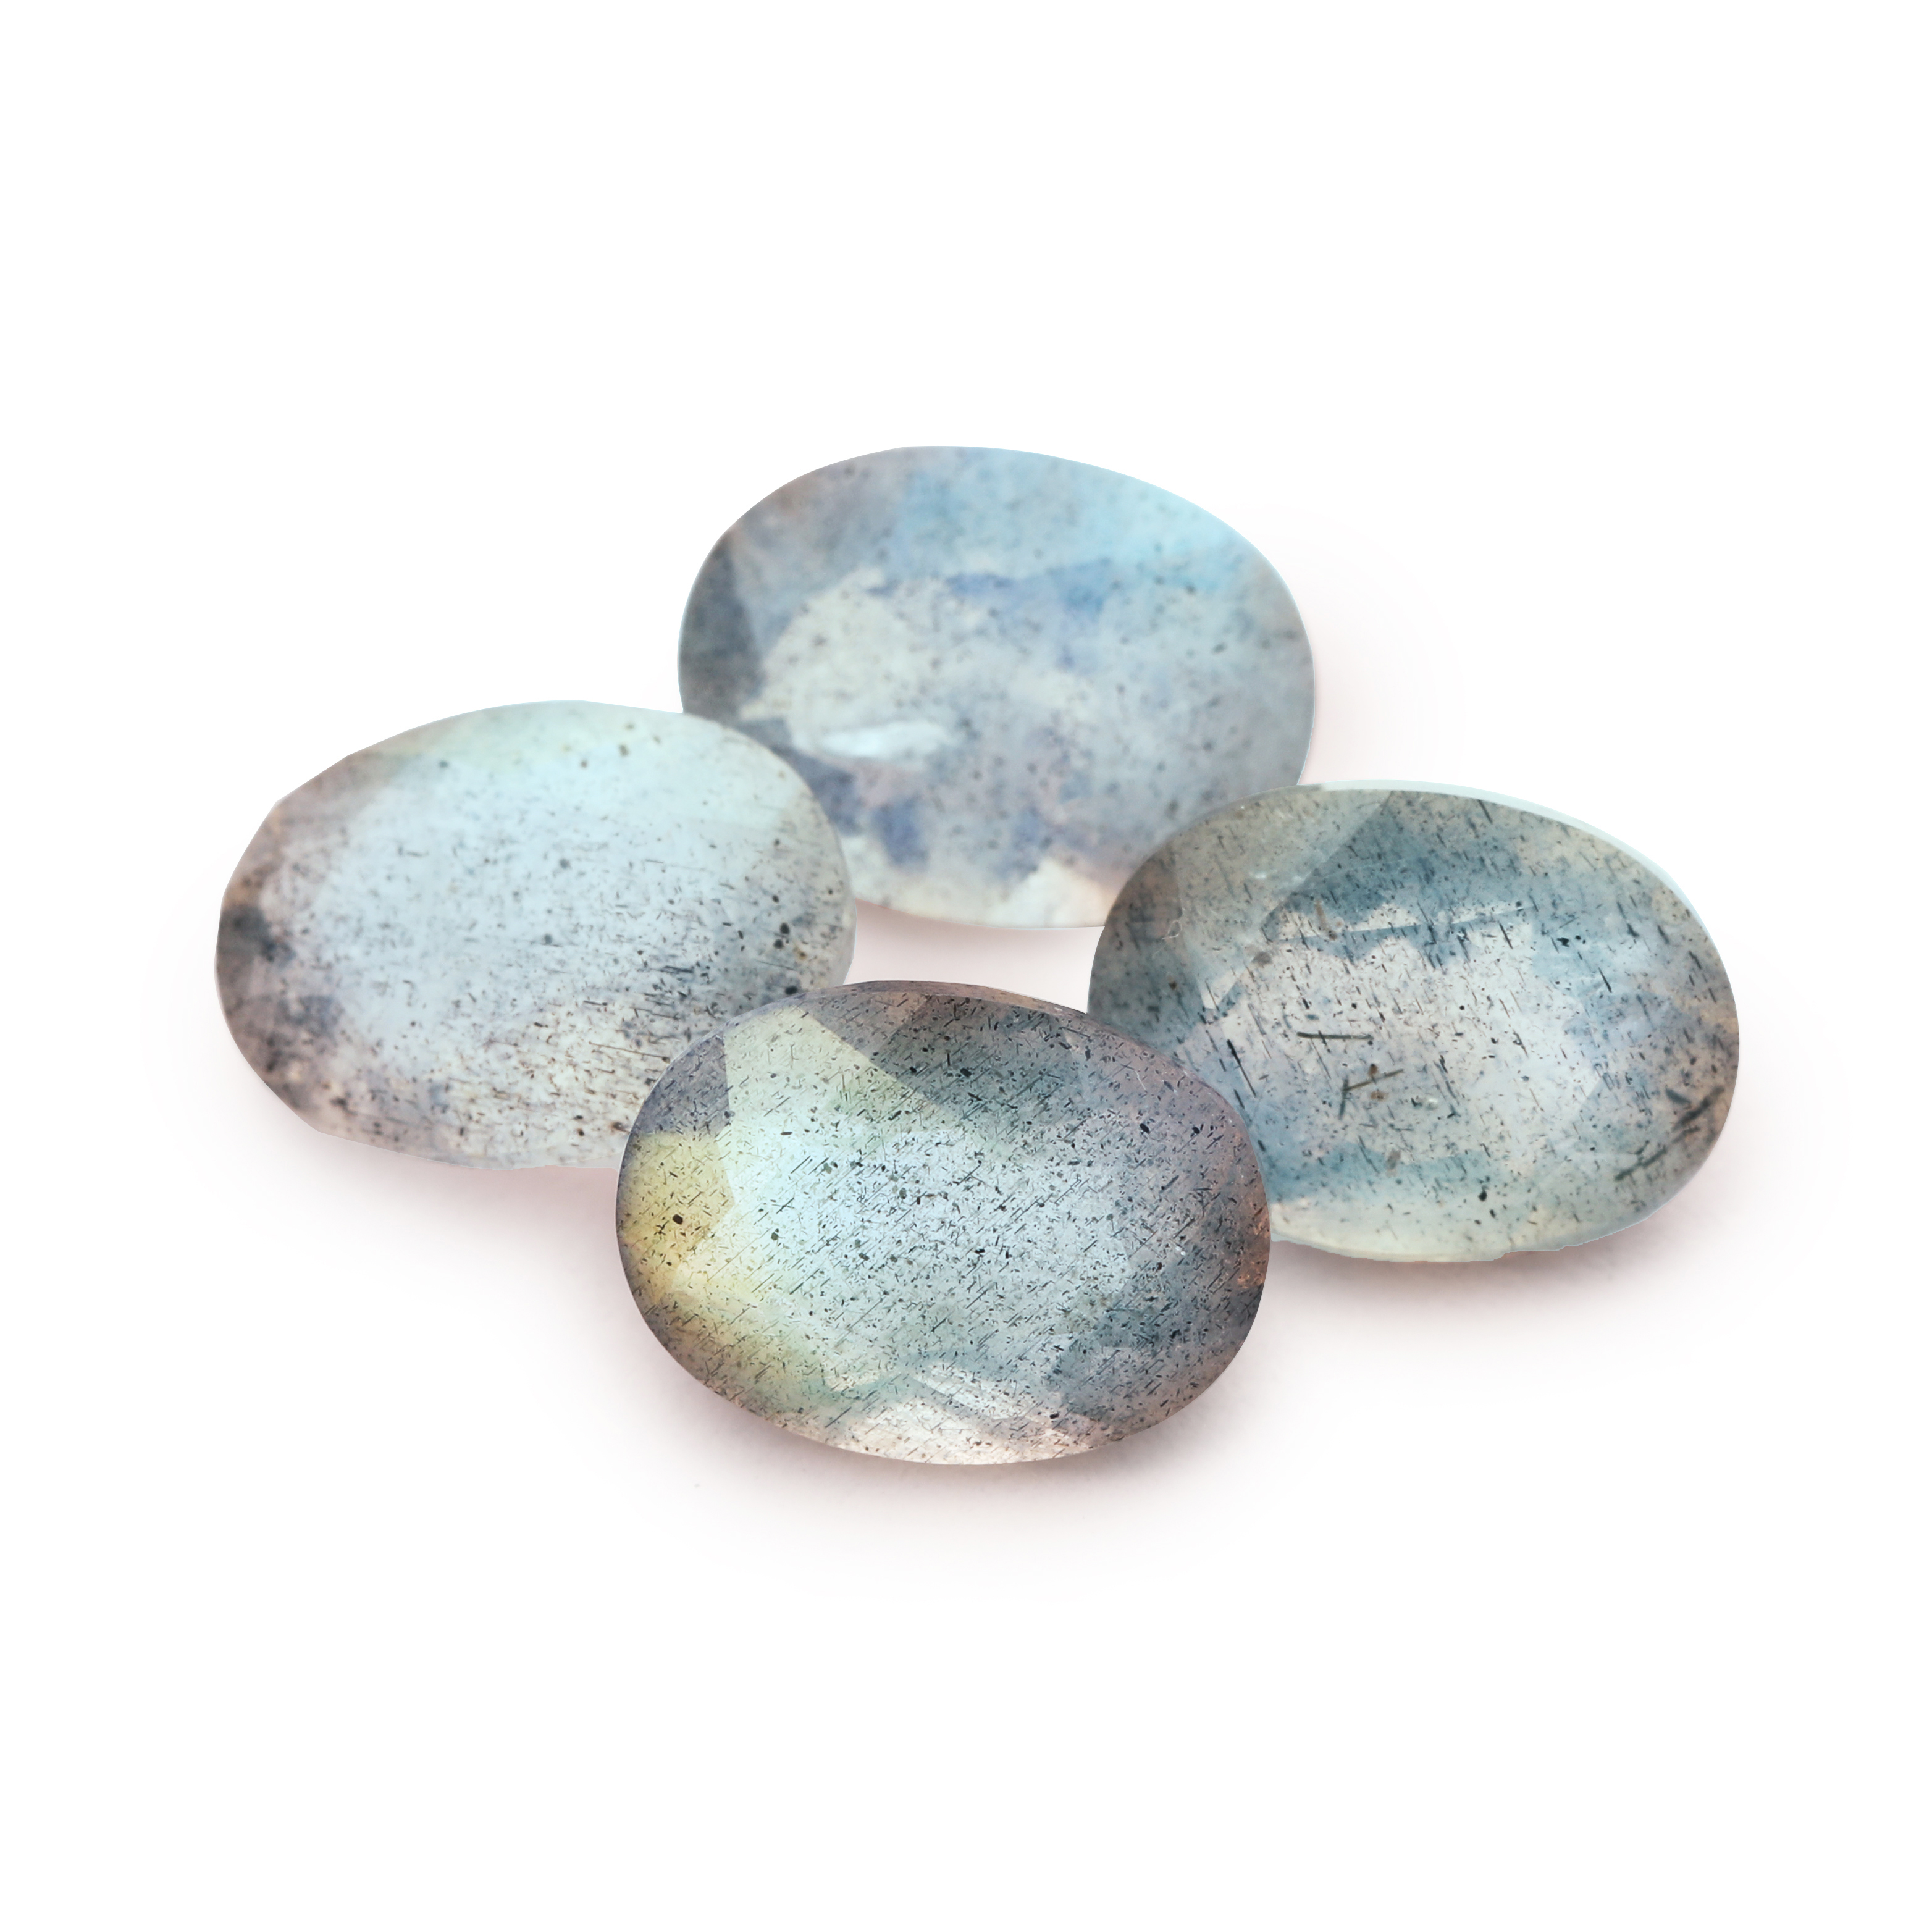 6x8MM Oval Labradorite Faceted Stone,Natural Gemstone,Unique Gemstone,Loose Stone,DIY Jewelry Supplies 4120148 - Click Image to Close